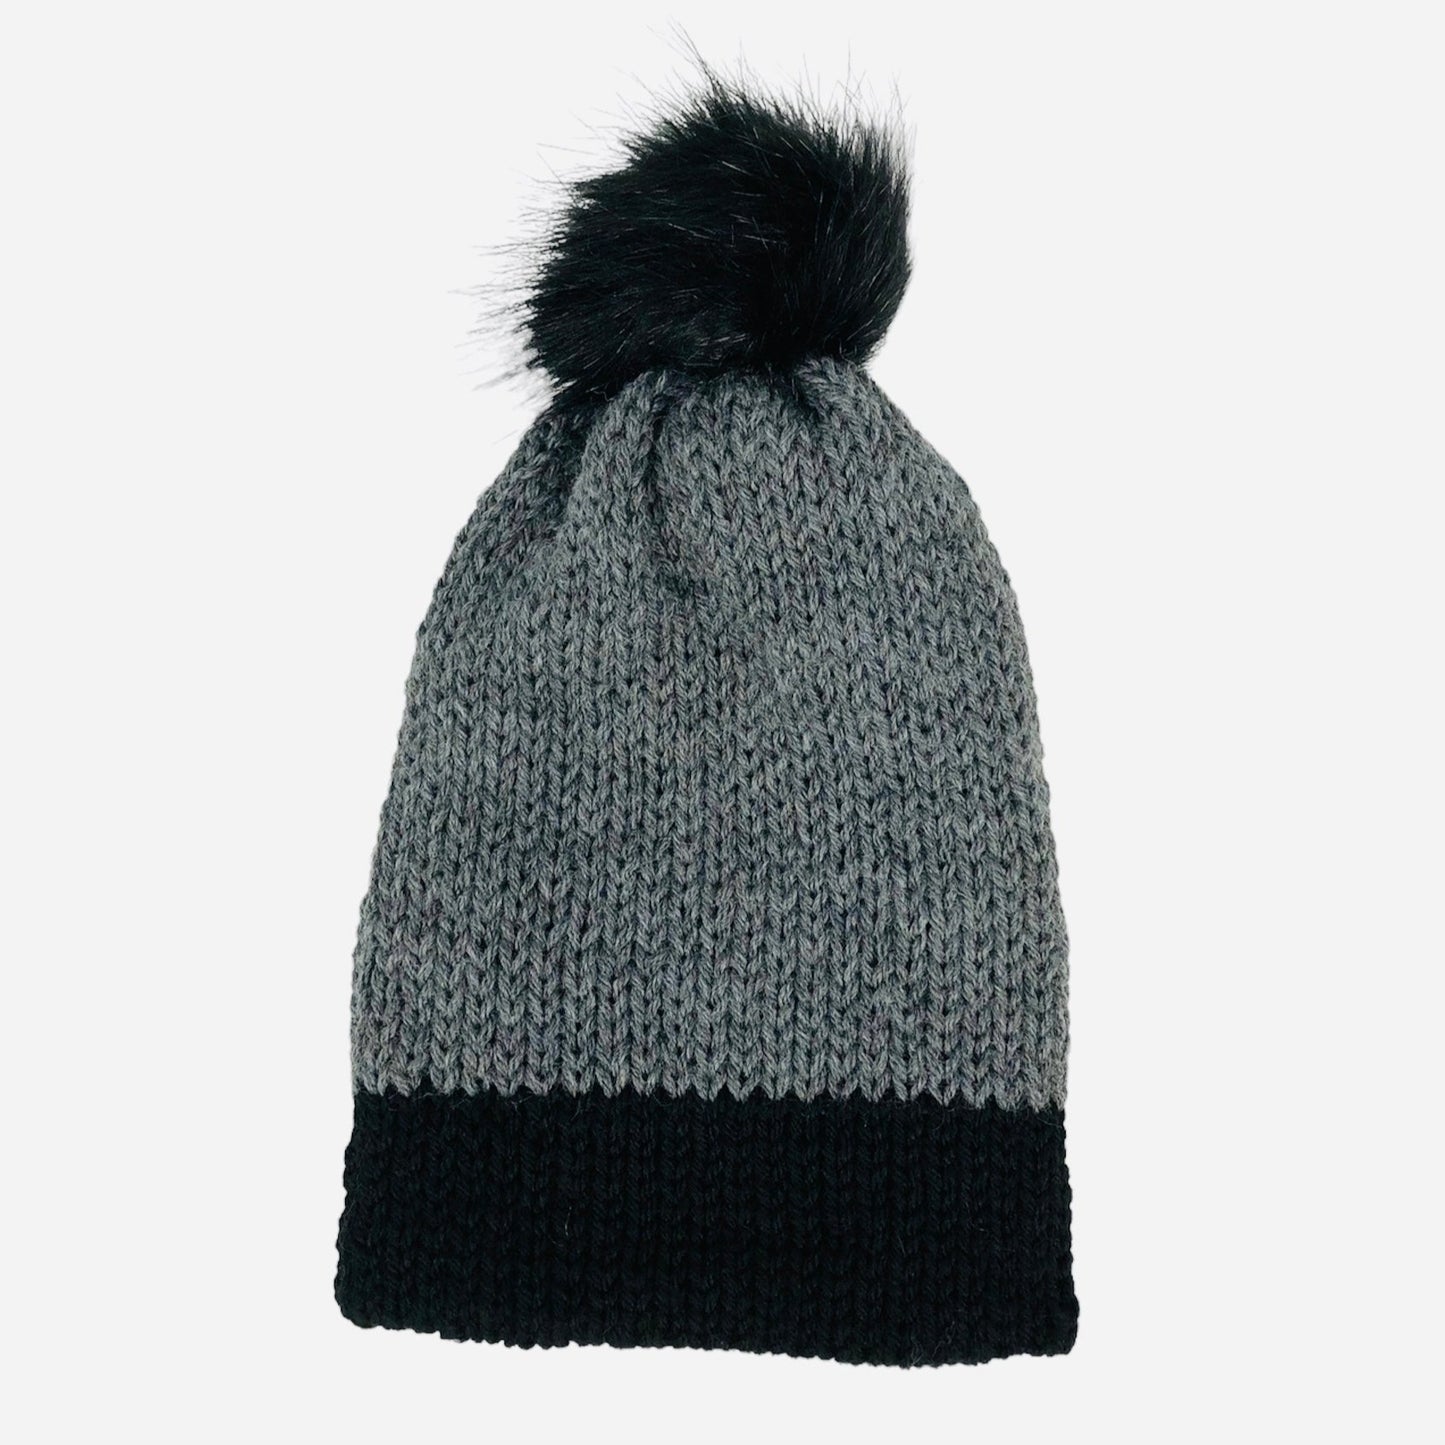 Gray and Black Winter Hat